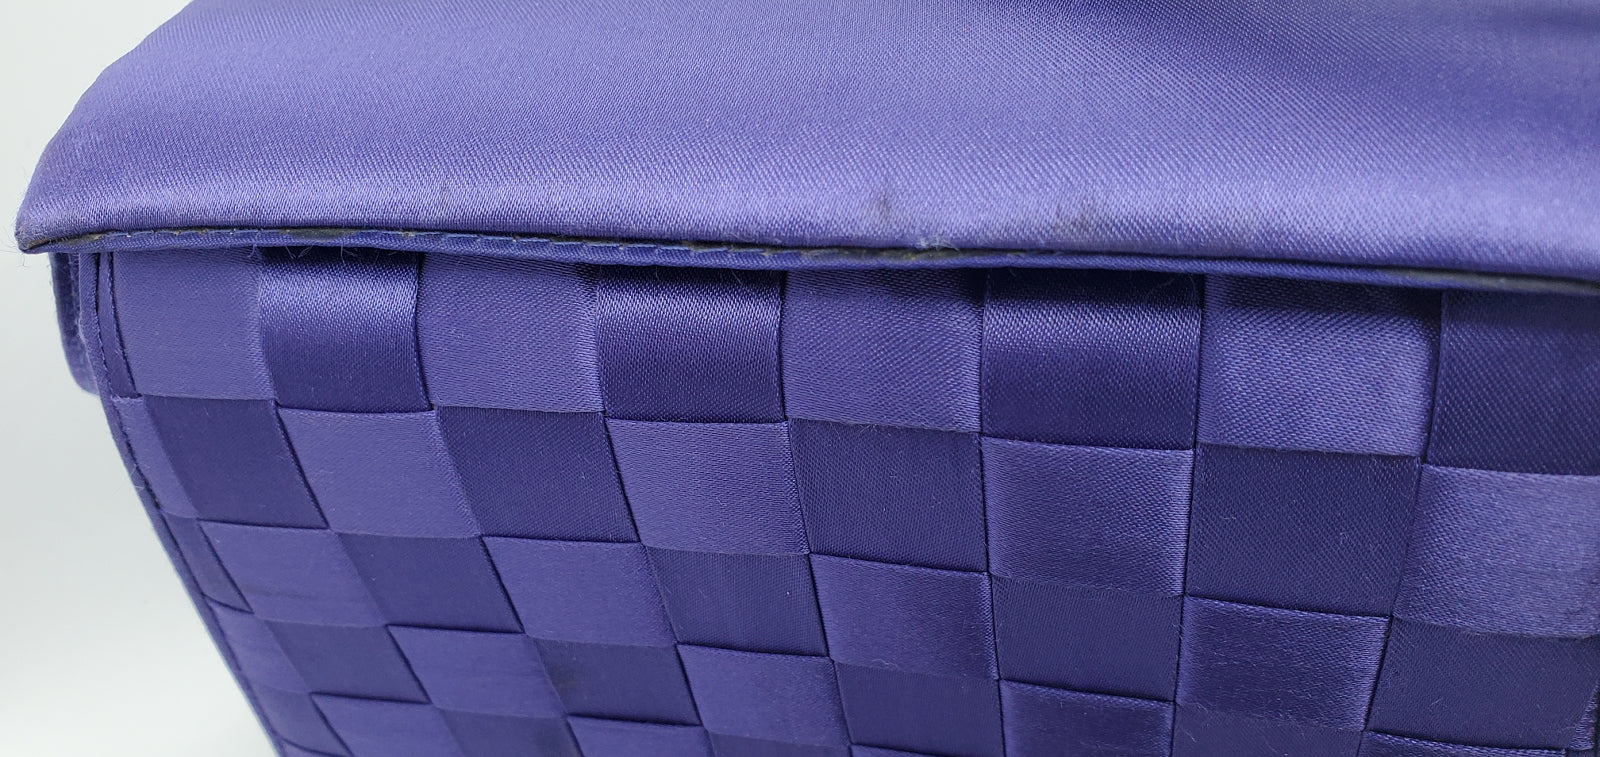 close up top view of purple handbag with woven details